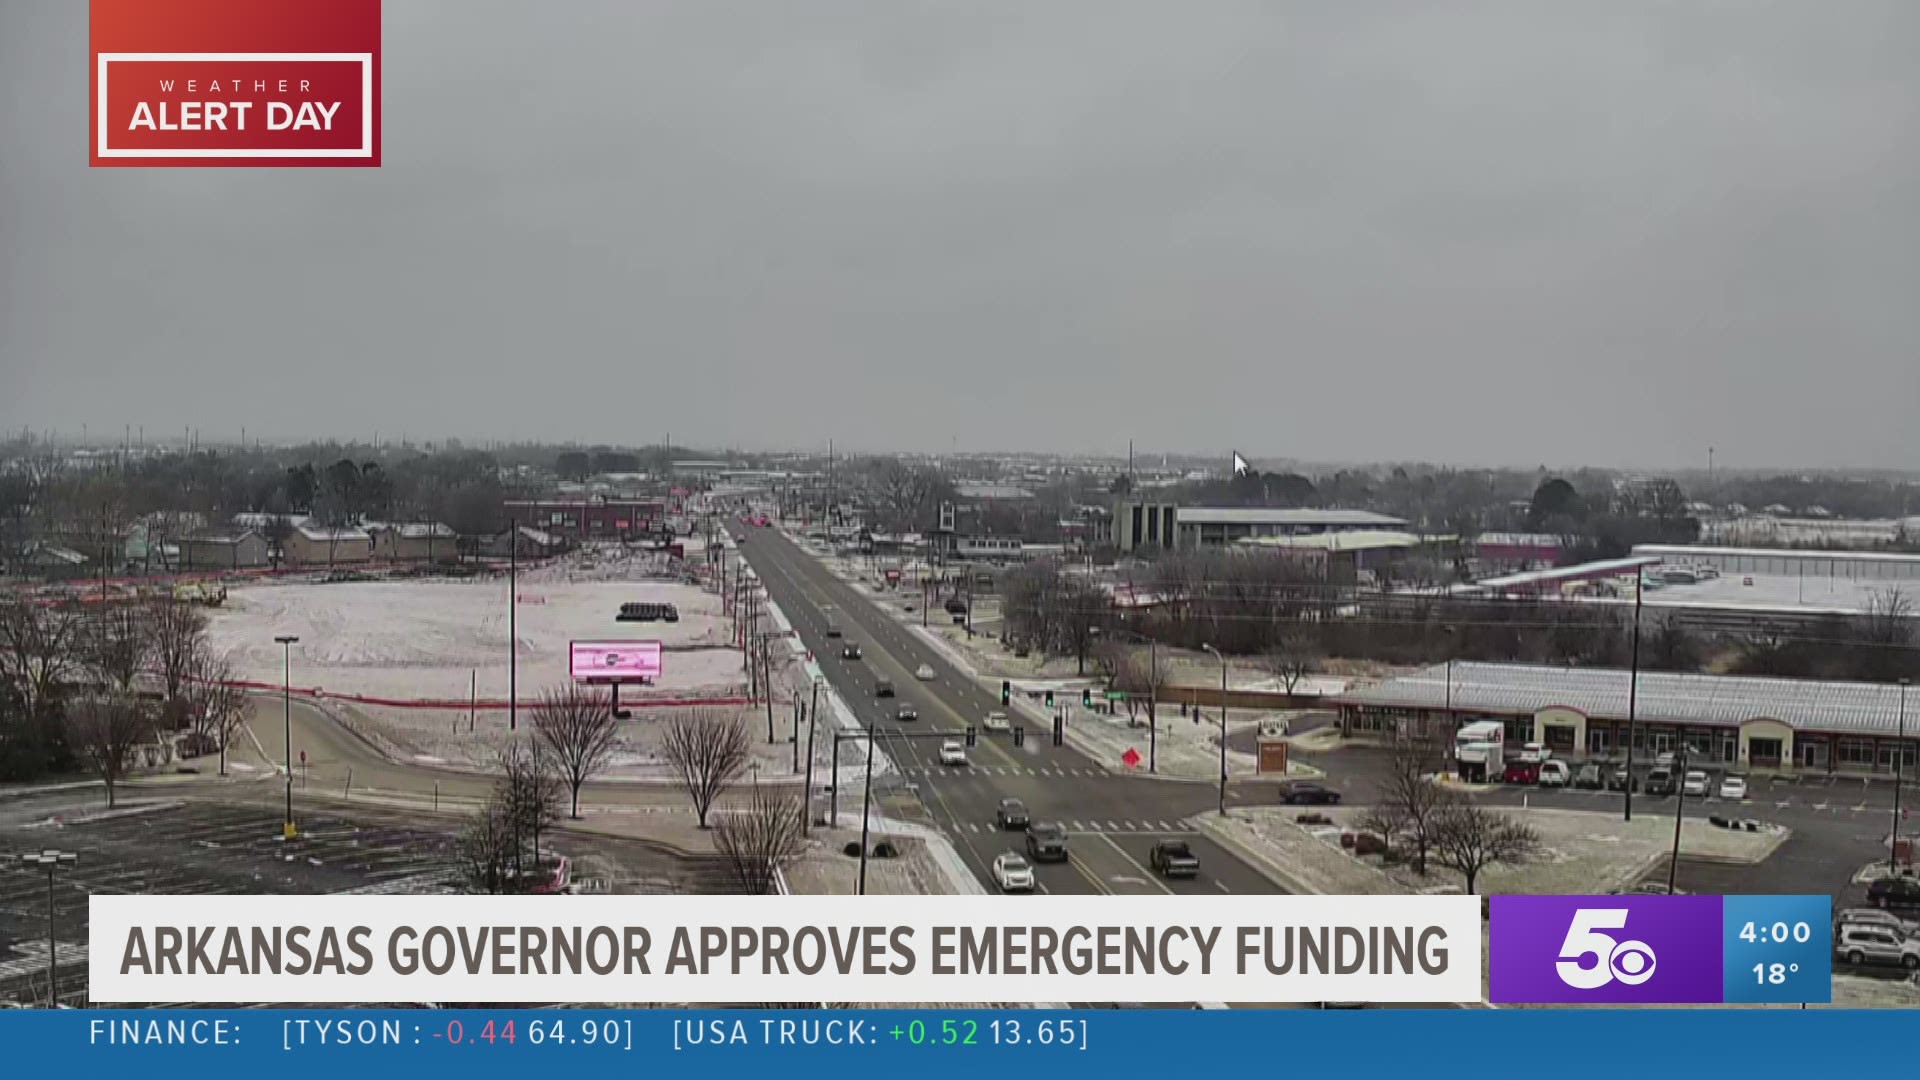 Arkansas Governor approves emergency funding for winter weather